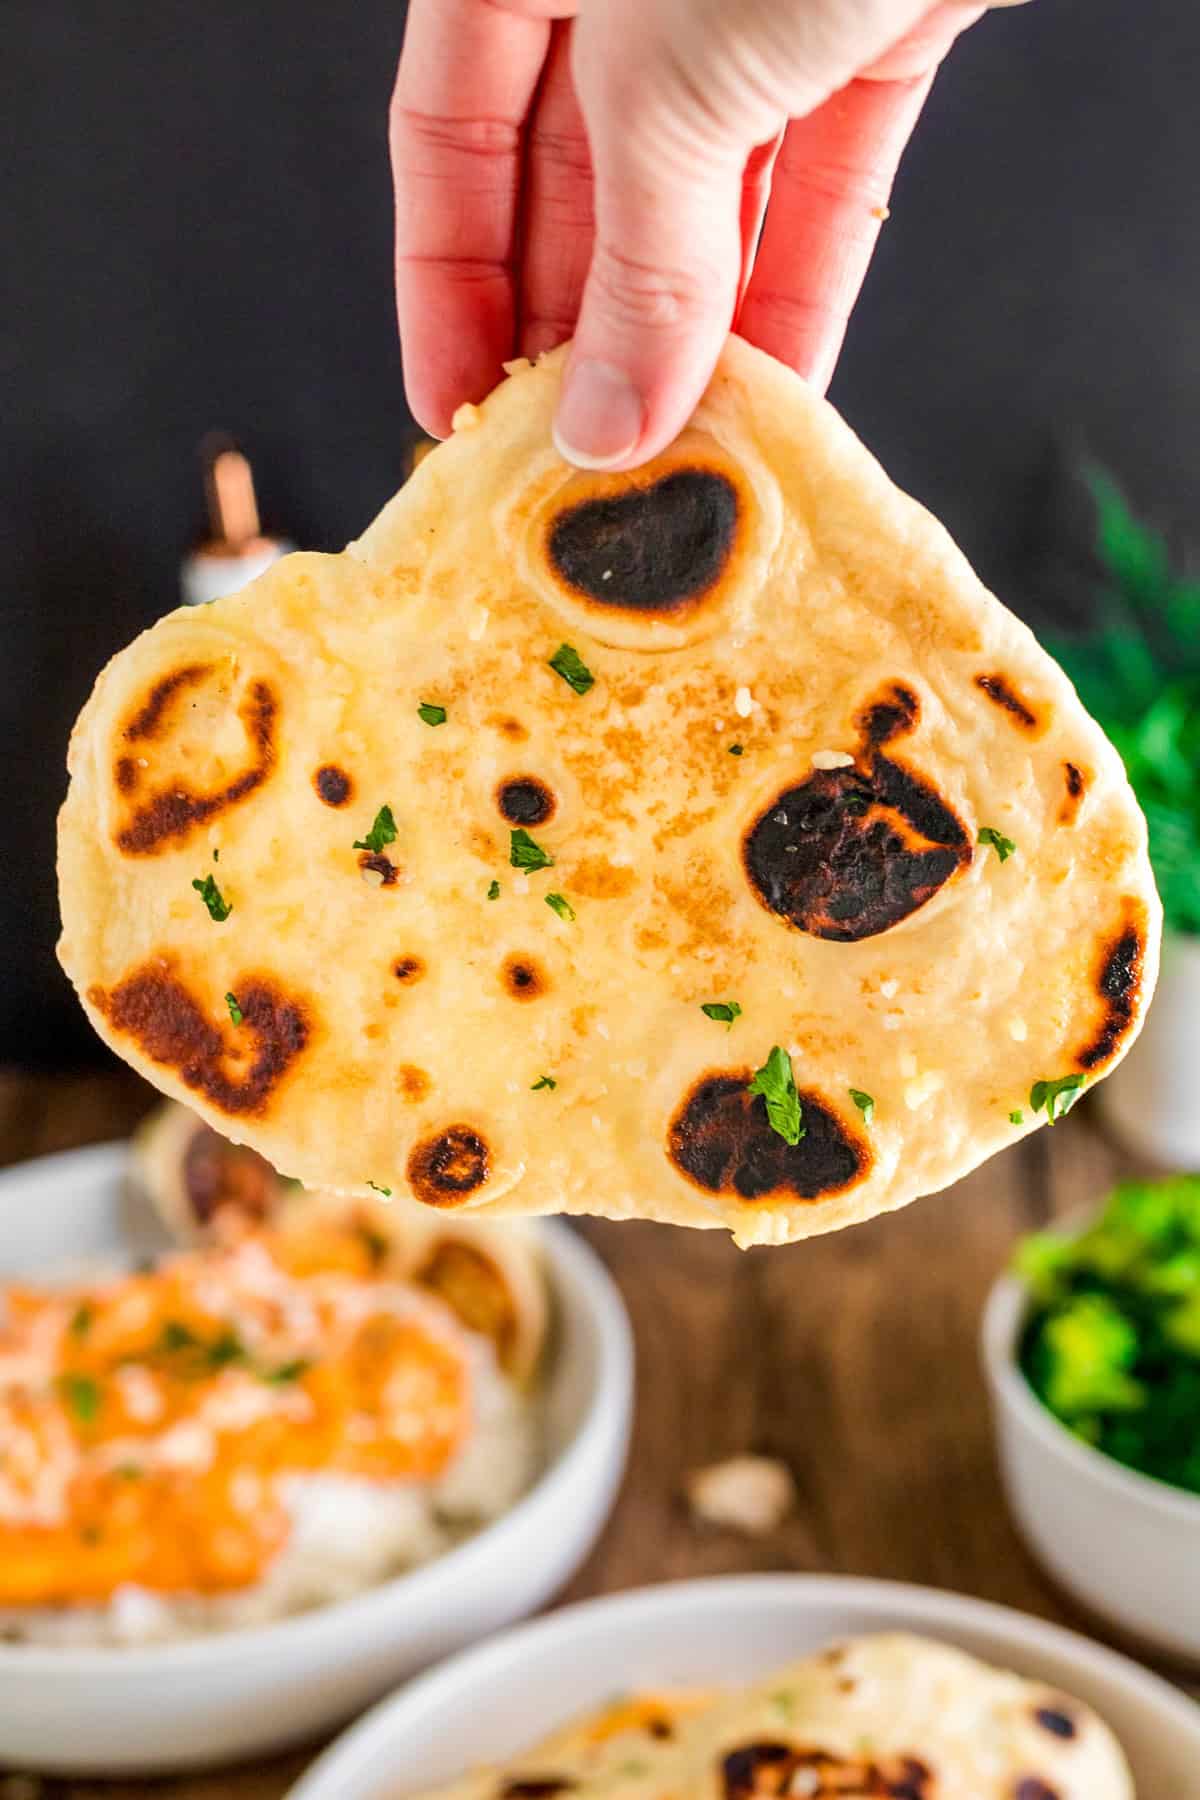 Hand holding up a piece of Garlic Naan showing the char marks.